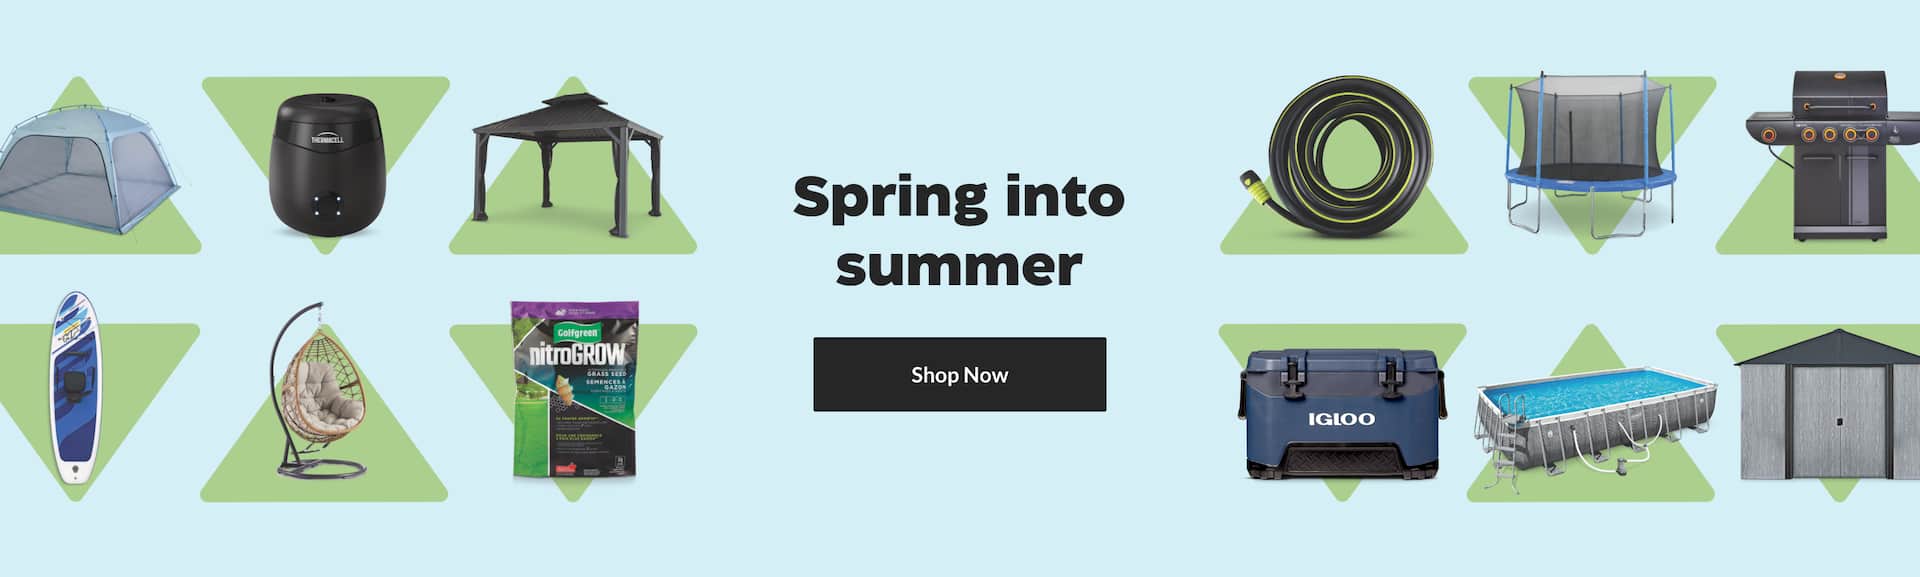 Various summer products including BBQs, pools and camping gear around a “Spring into summer” title